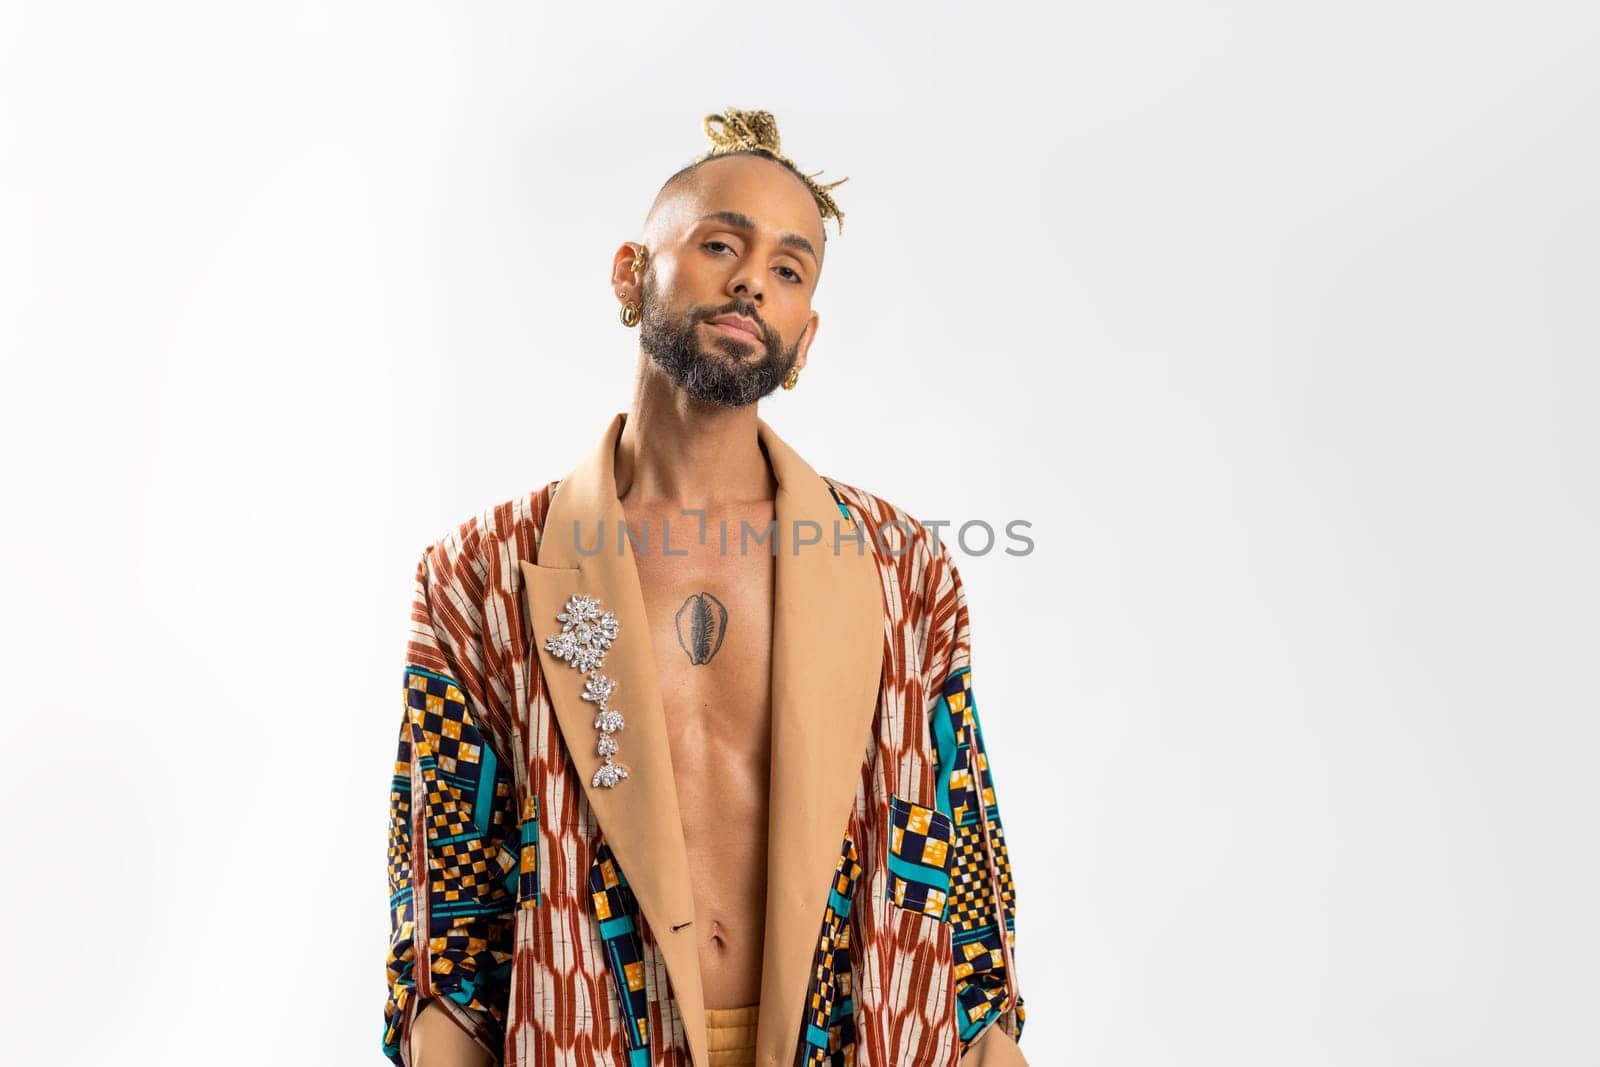 Trendy black latin gay man in fashionable clothes look camera isolated on white background studio portrait People lifestyle fashion lgbtq concept